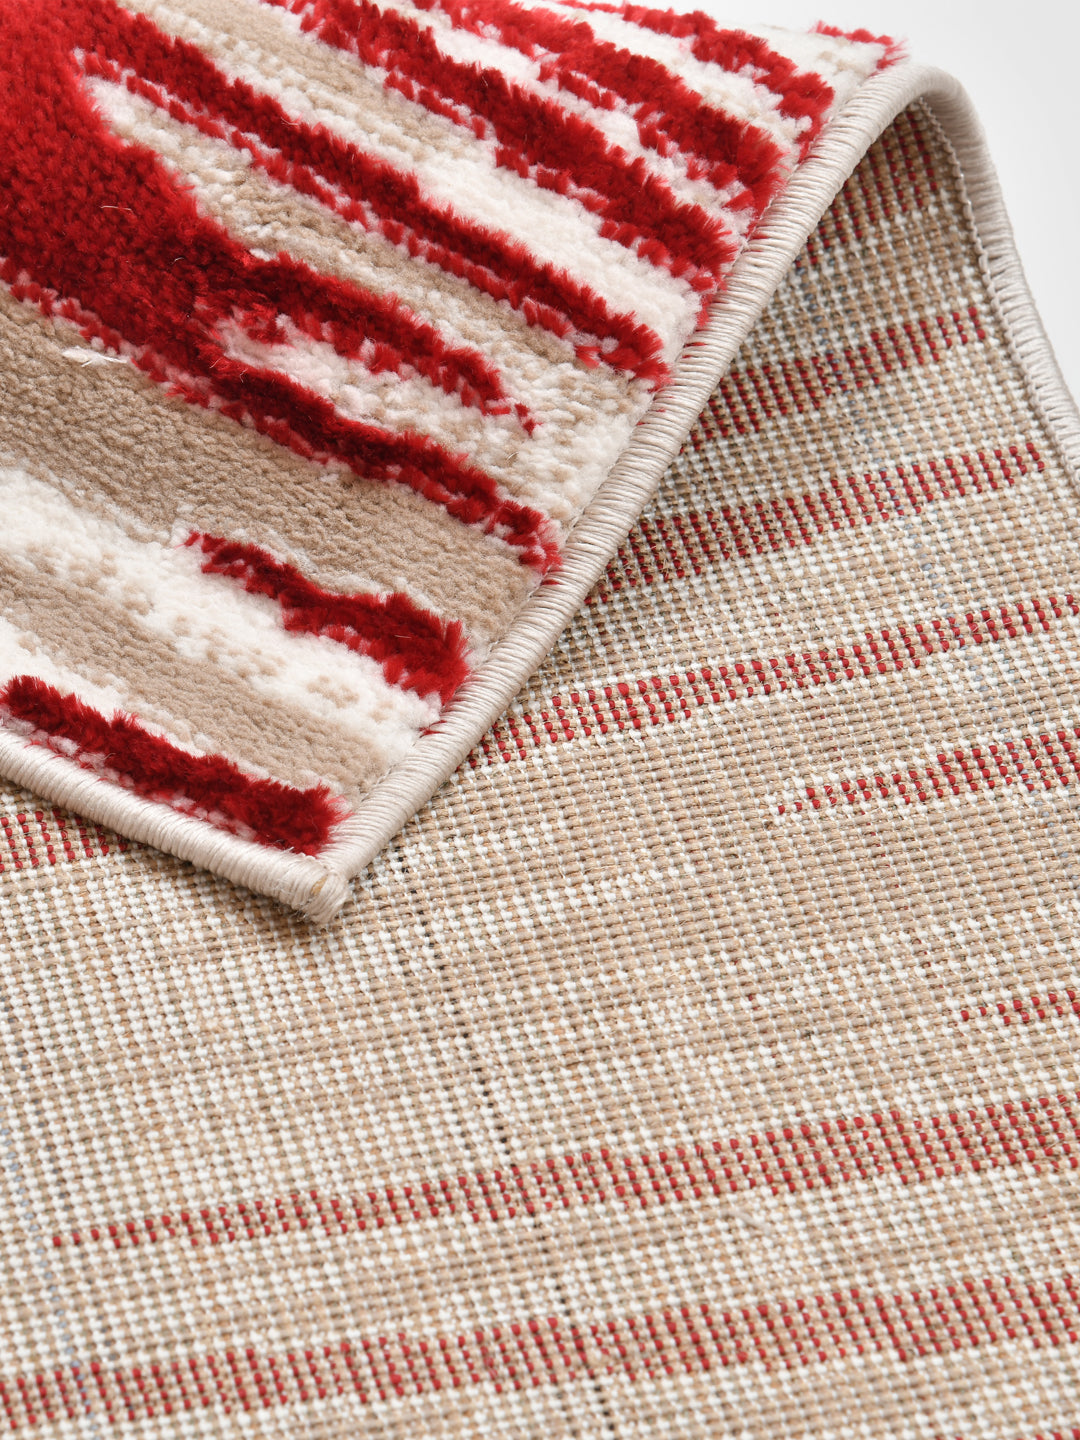 Doormat With Anti Skid Backing; 16x24 Inches; Maroon Beige Stripes